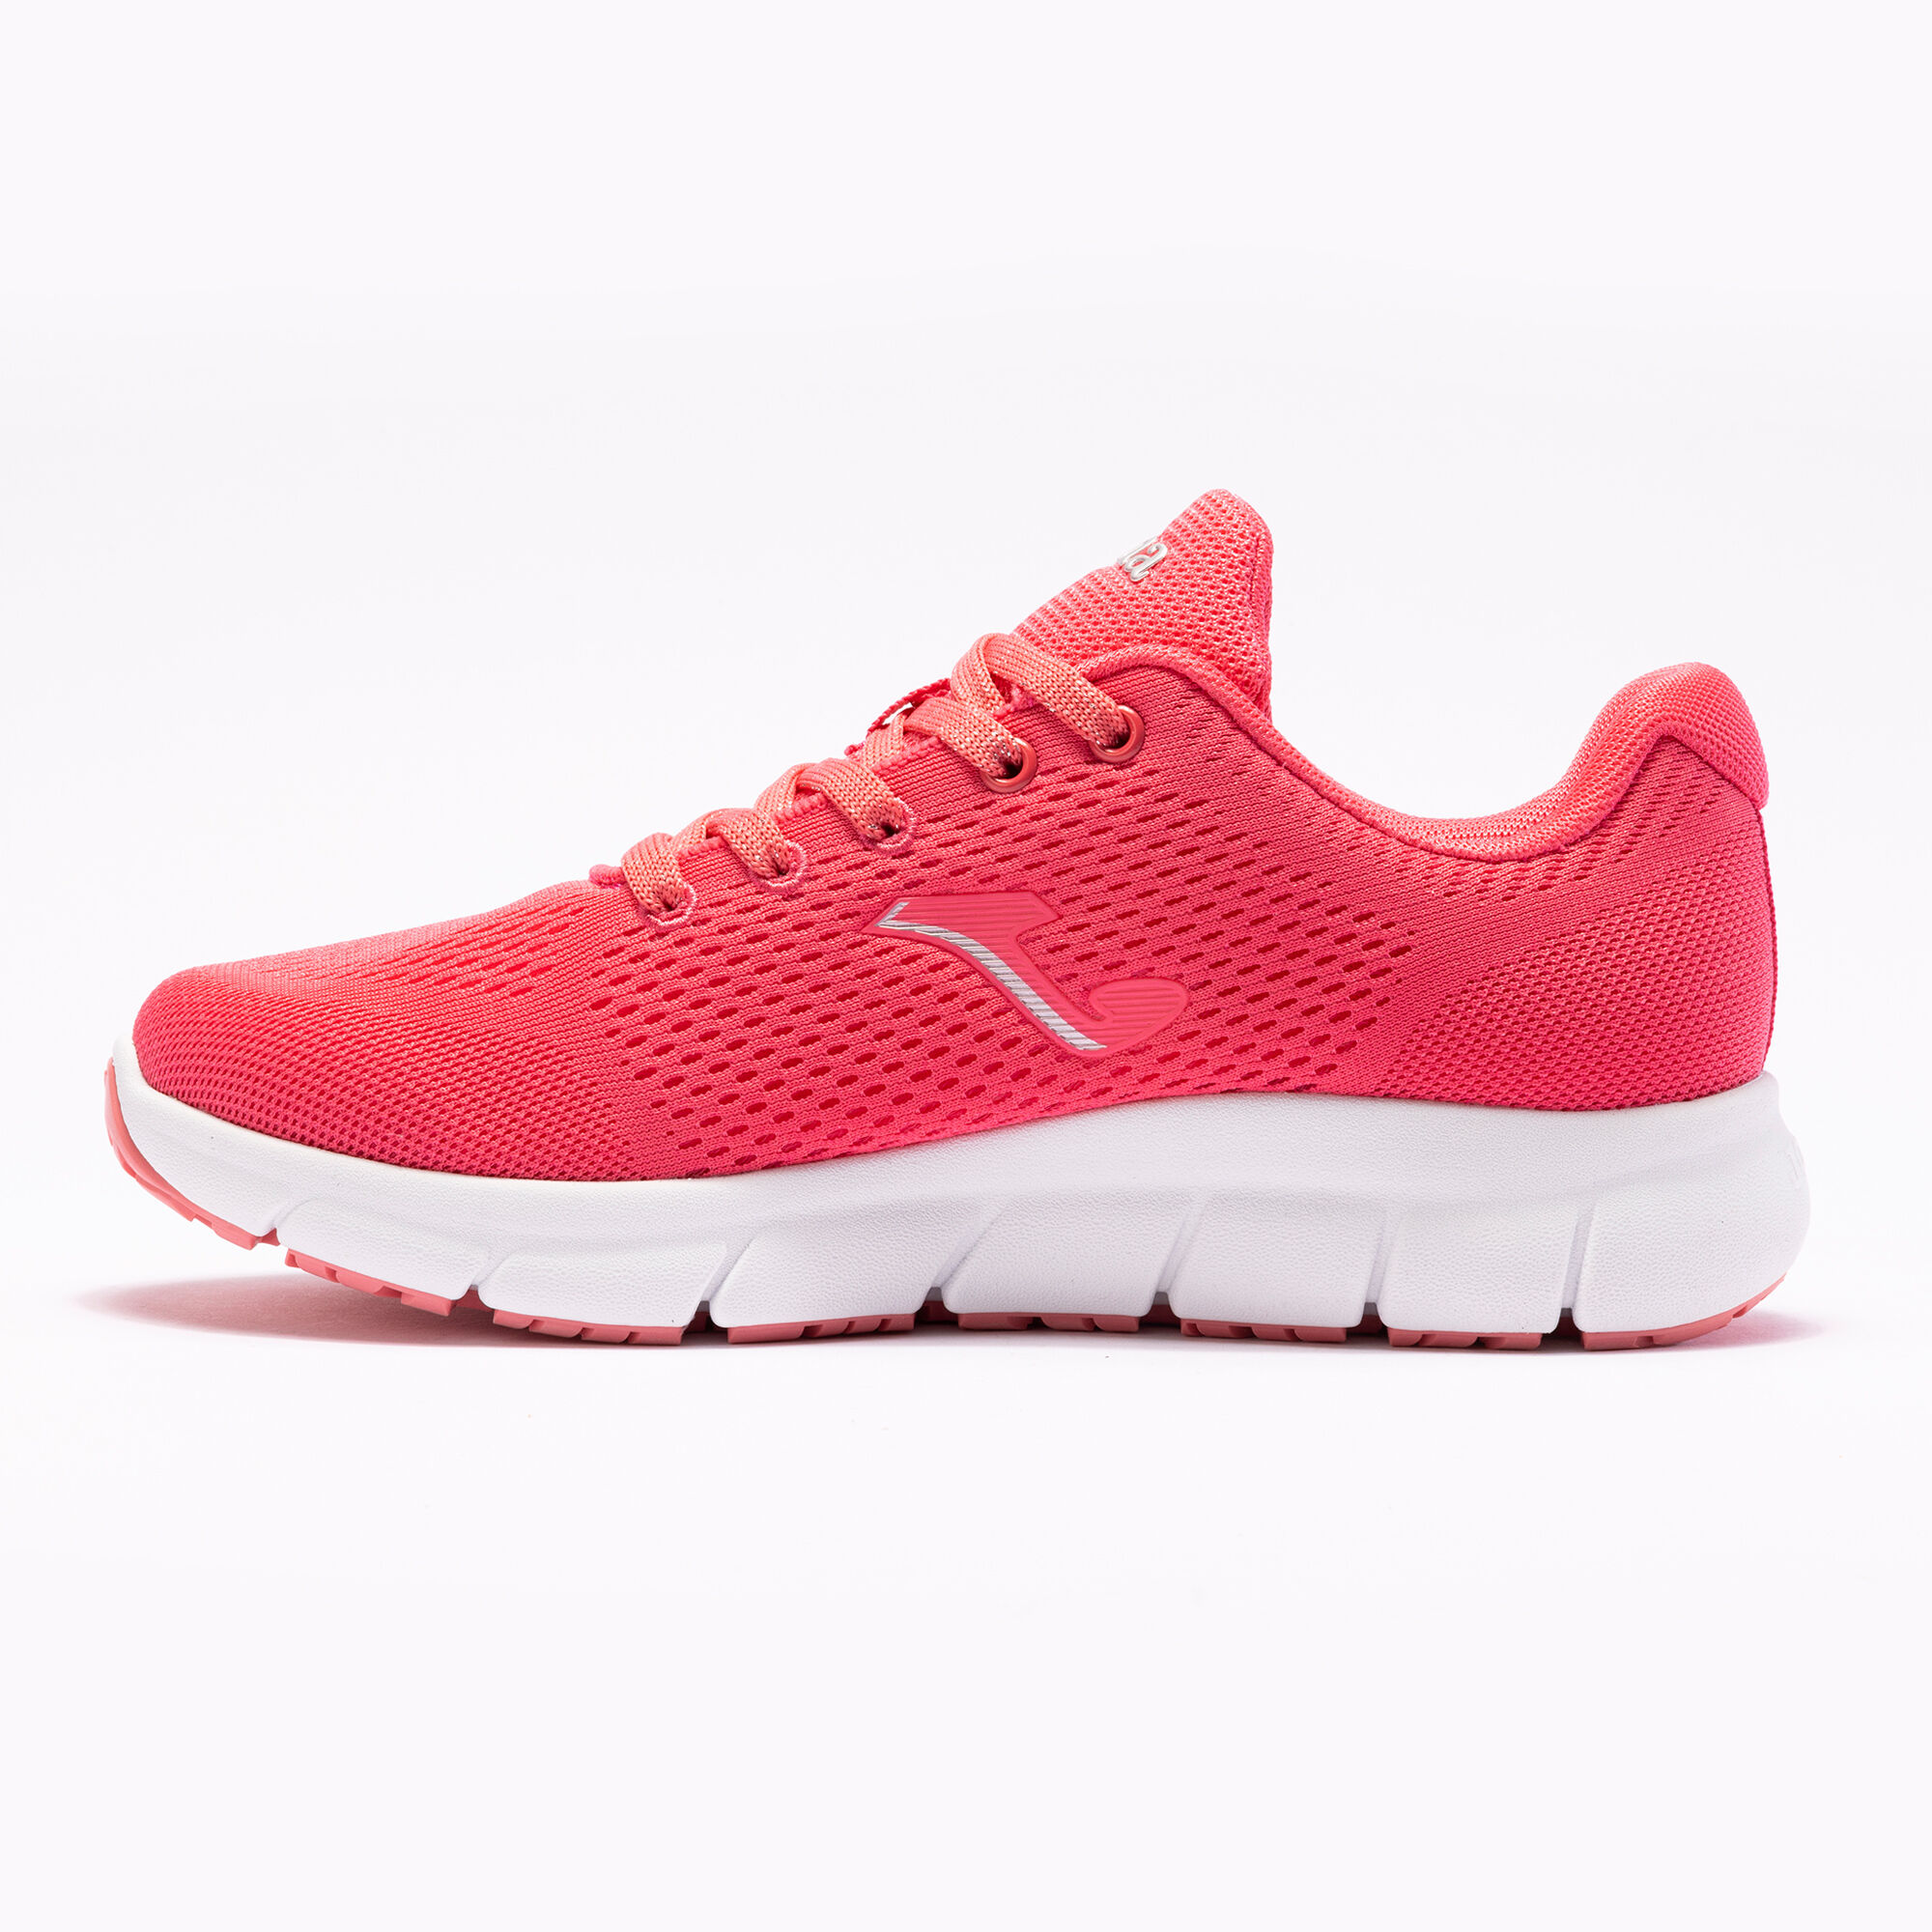 Chaussures casual Zen Lady 24 femme rose